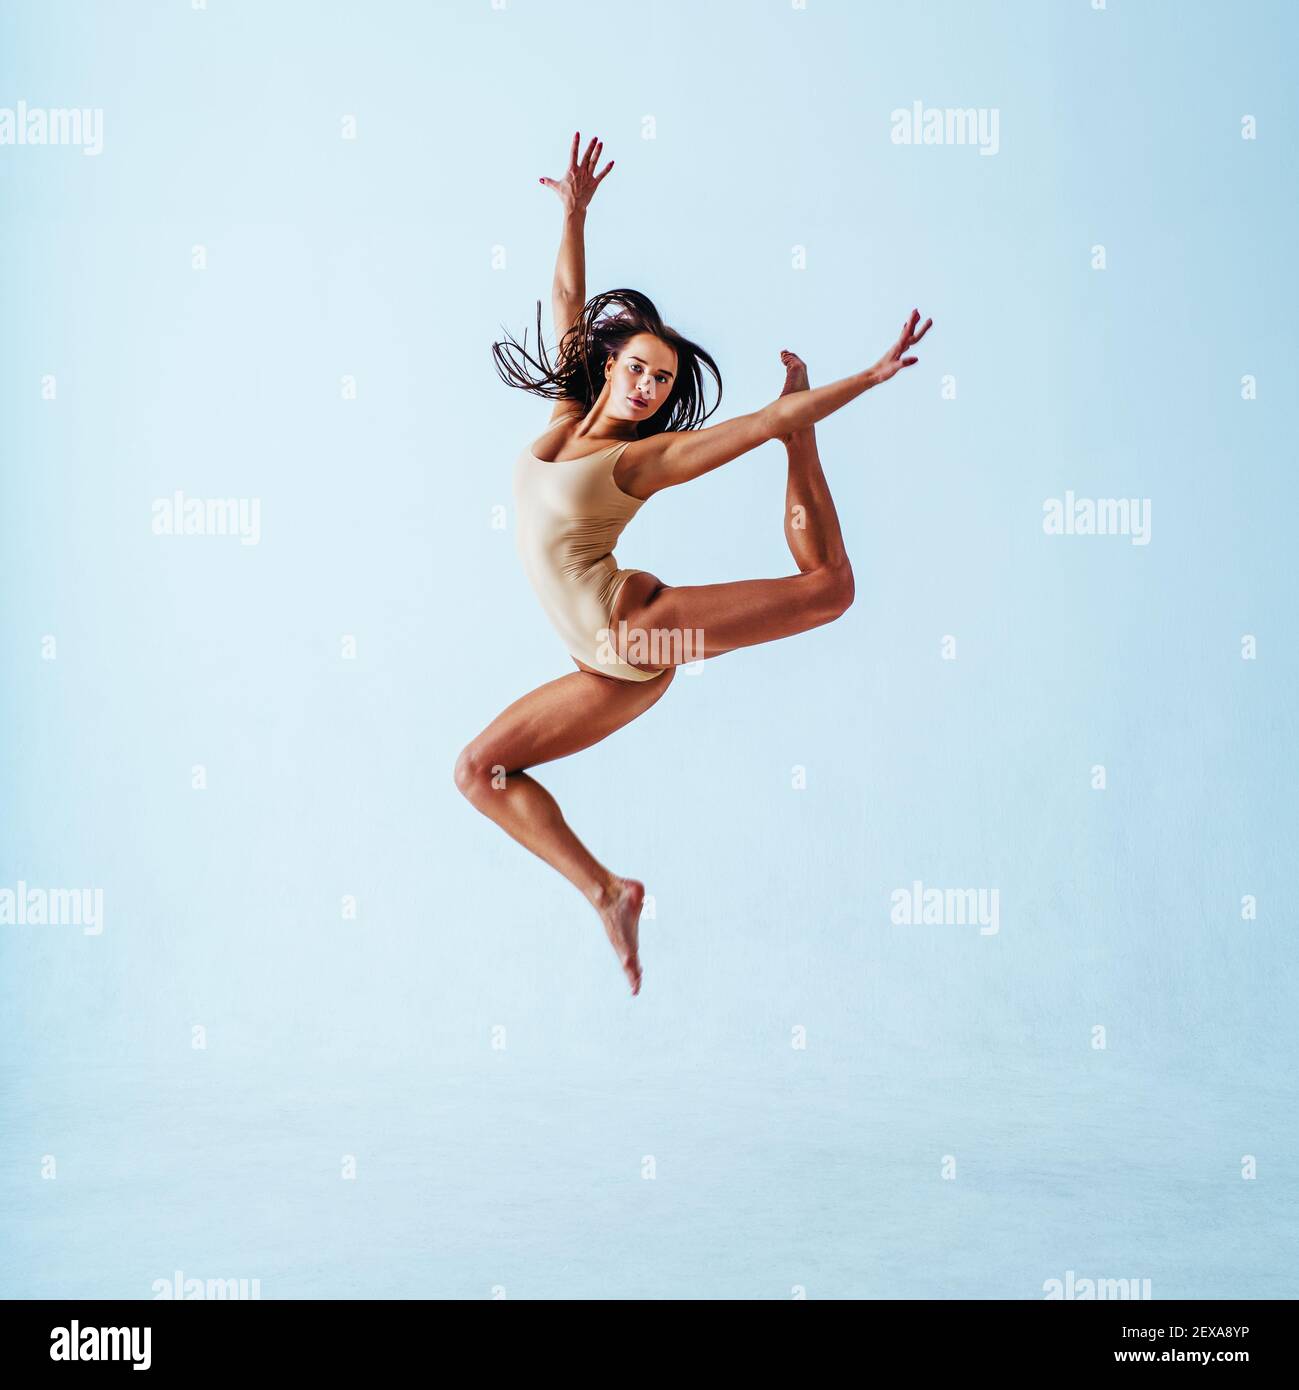 Young woman gymnast jumping with on white background Stock Photo